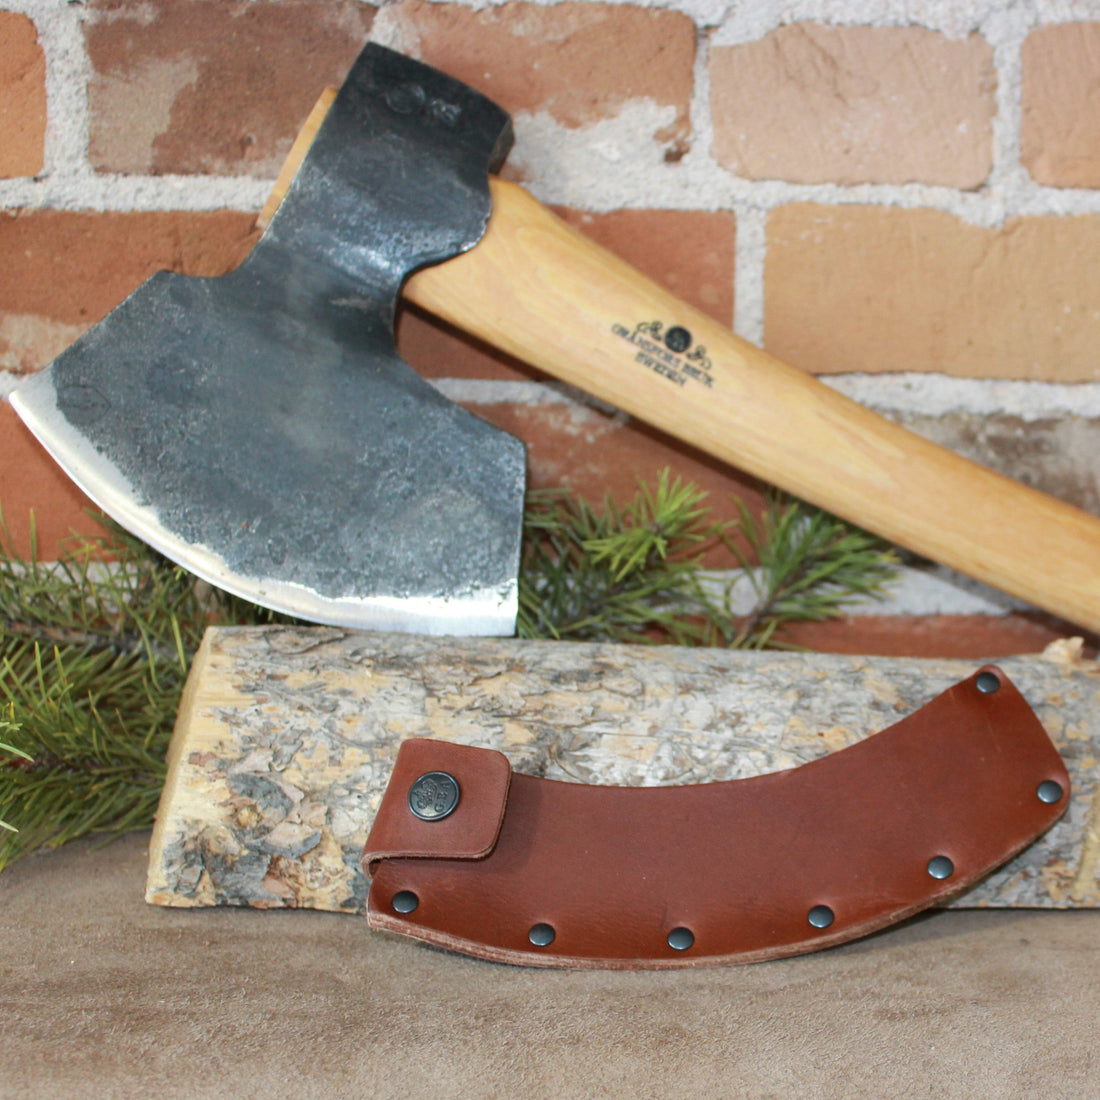 Gränsfors Bruk Broad Axe 1900 Right-Angled Sharpened Bevel On Right view of without sheath